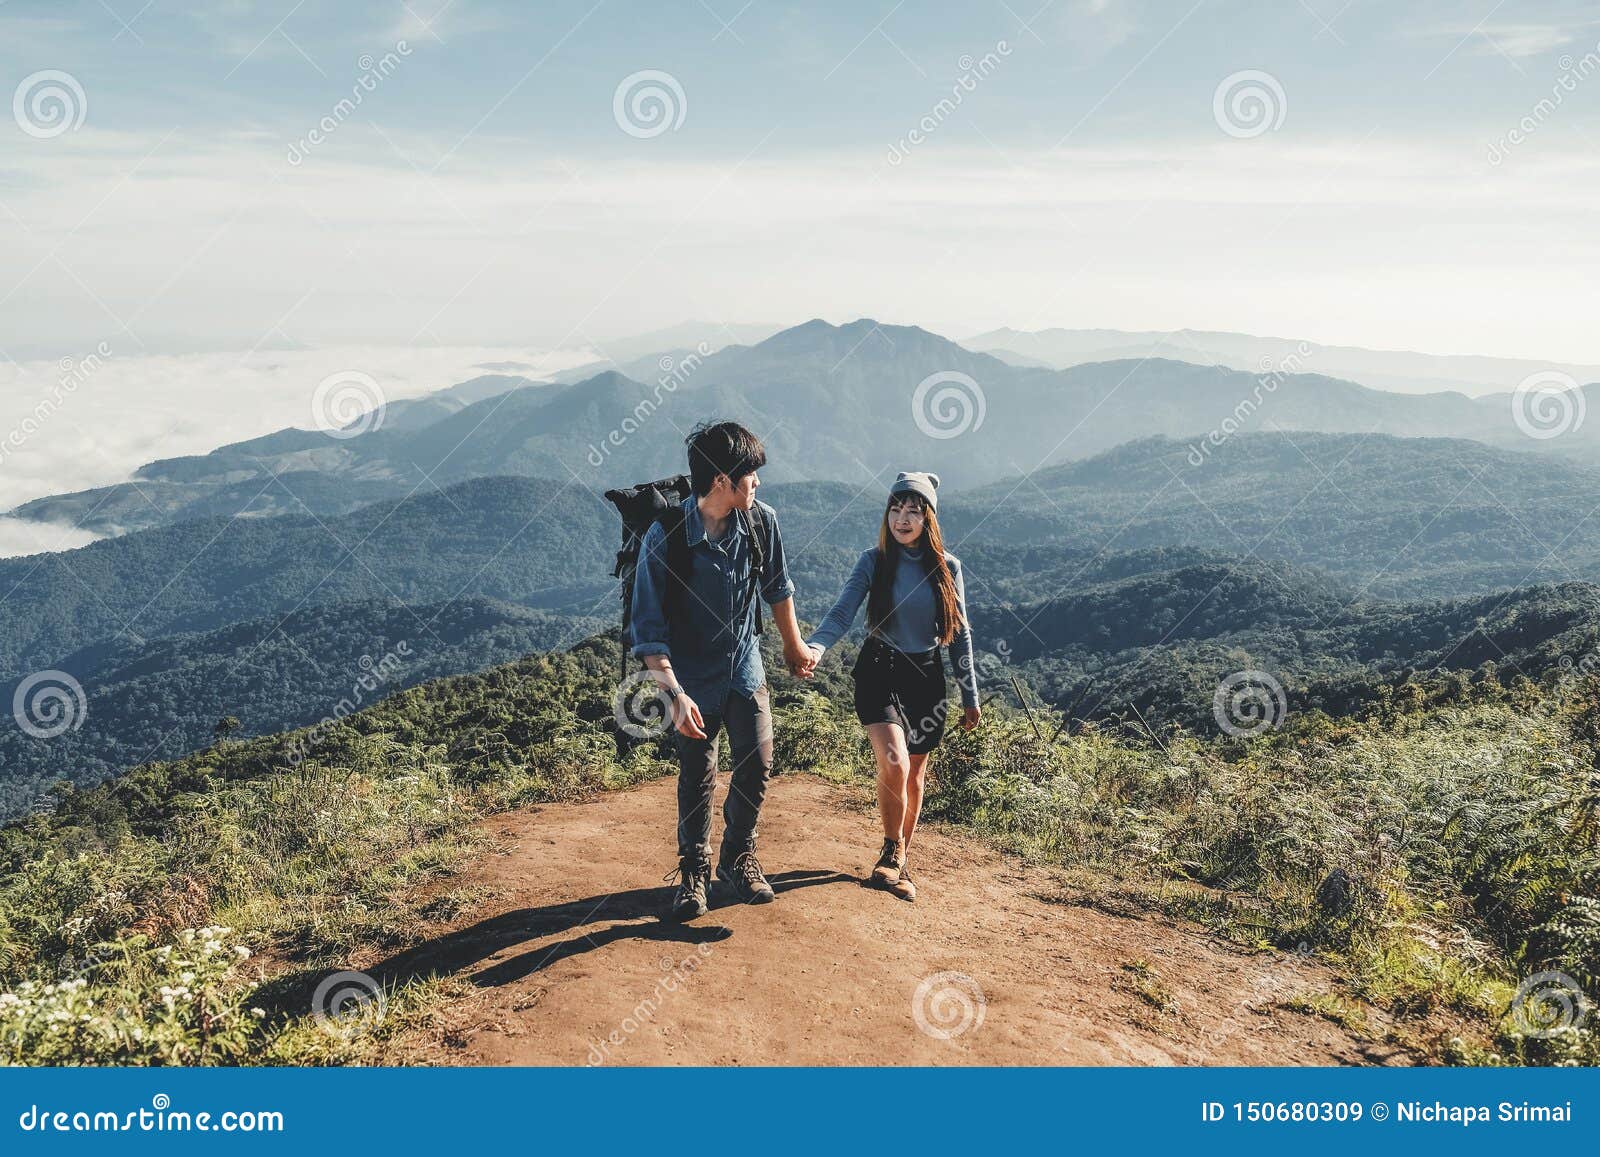 Adventures Couple Trail Hiking In The Forest Stock Image Image Of